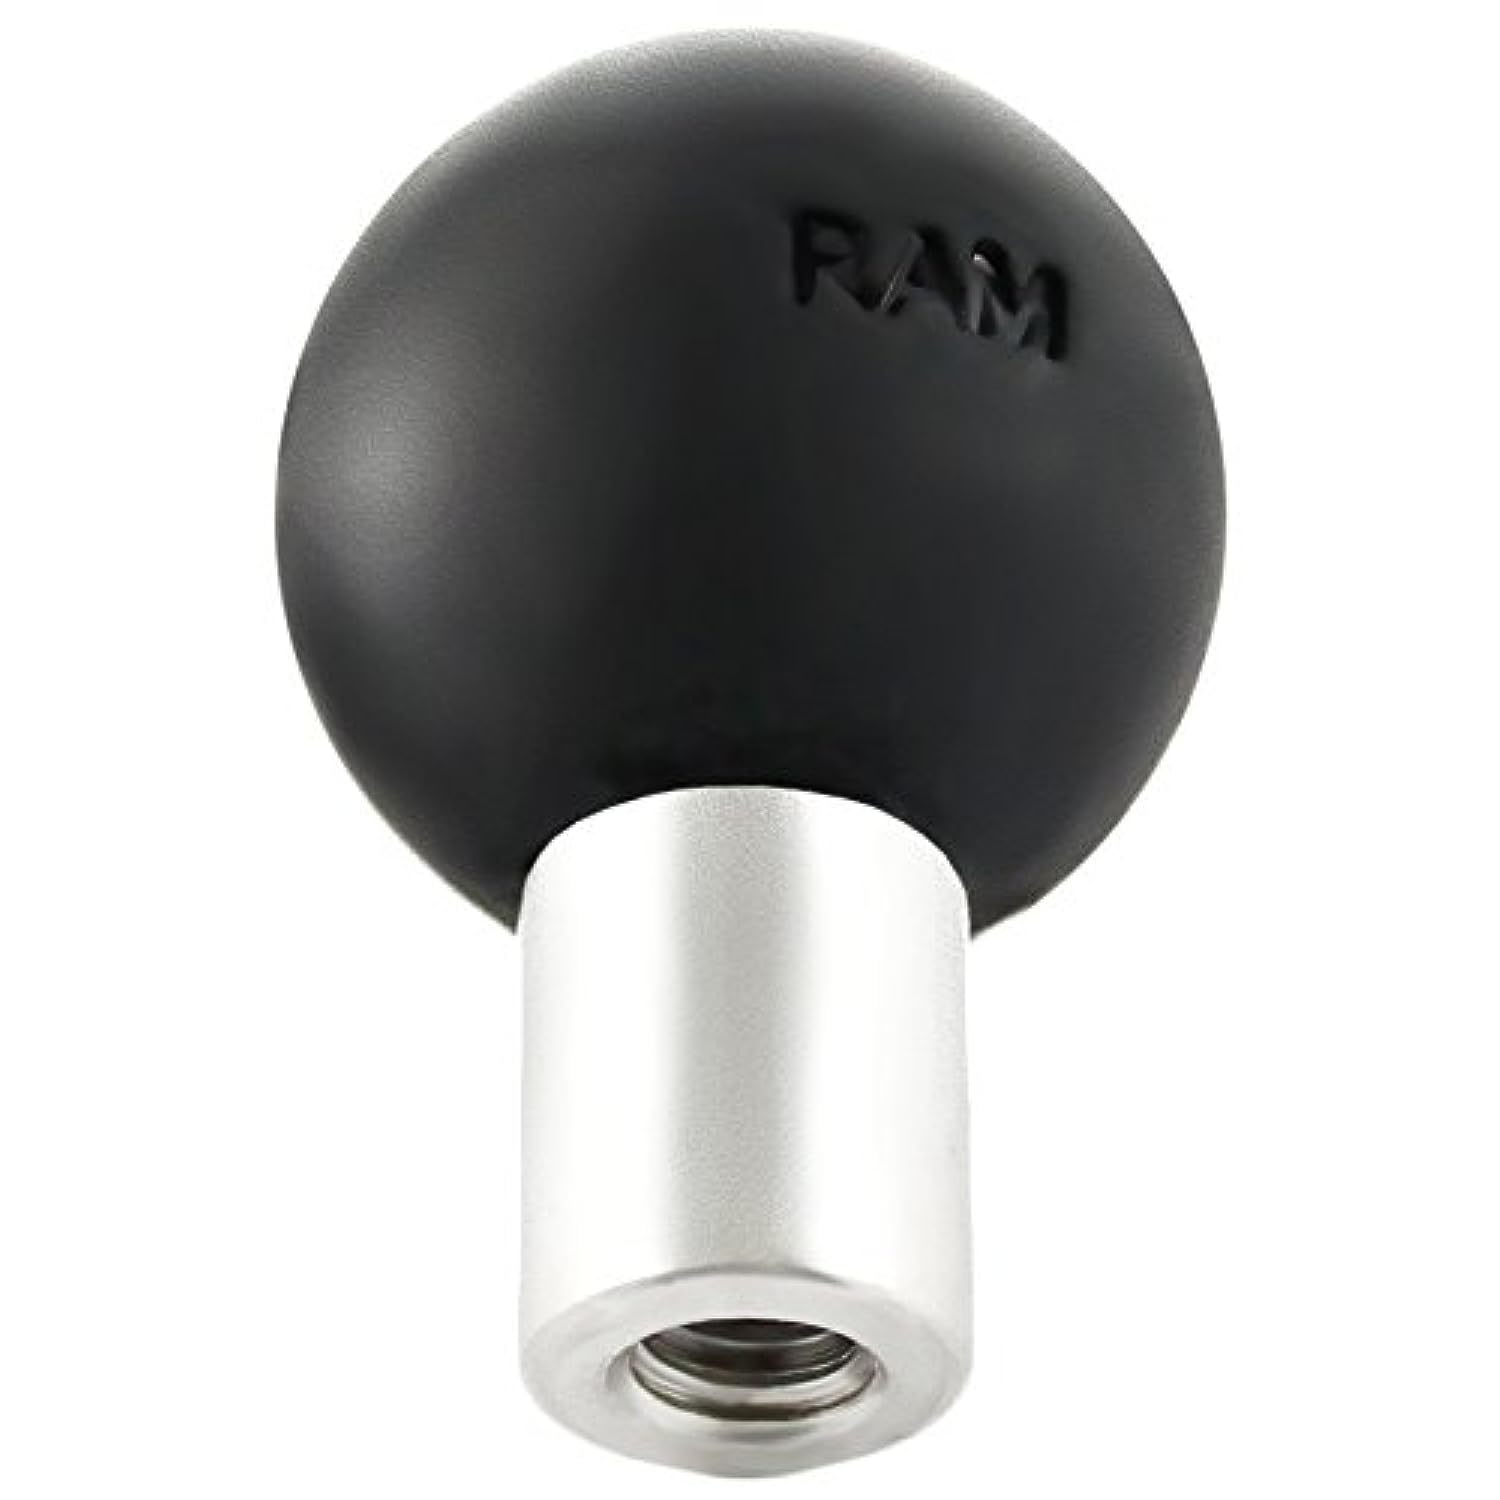 Primary image for RAM Mounts RAM-B-348U Ball Adapter with 1/4"-20 Threaded Hole with B Size 1" Bal